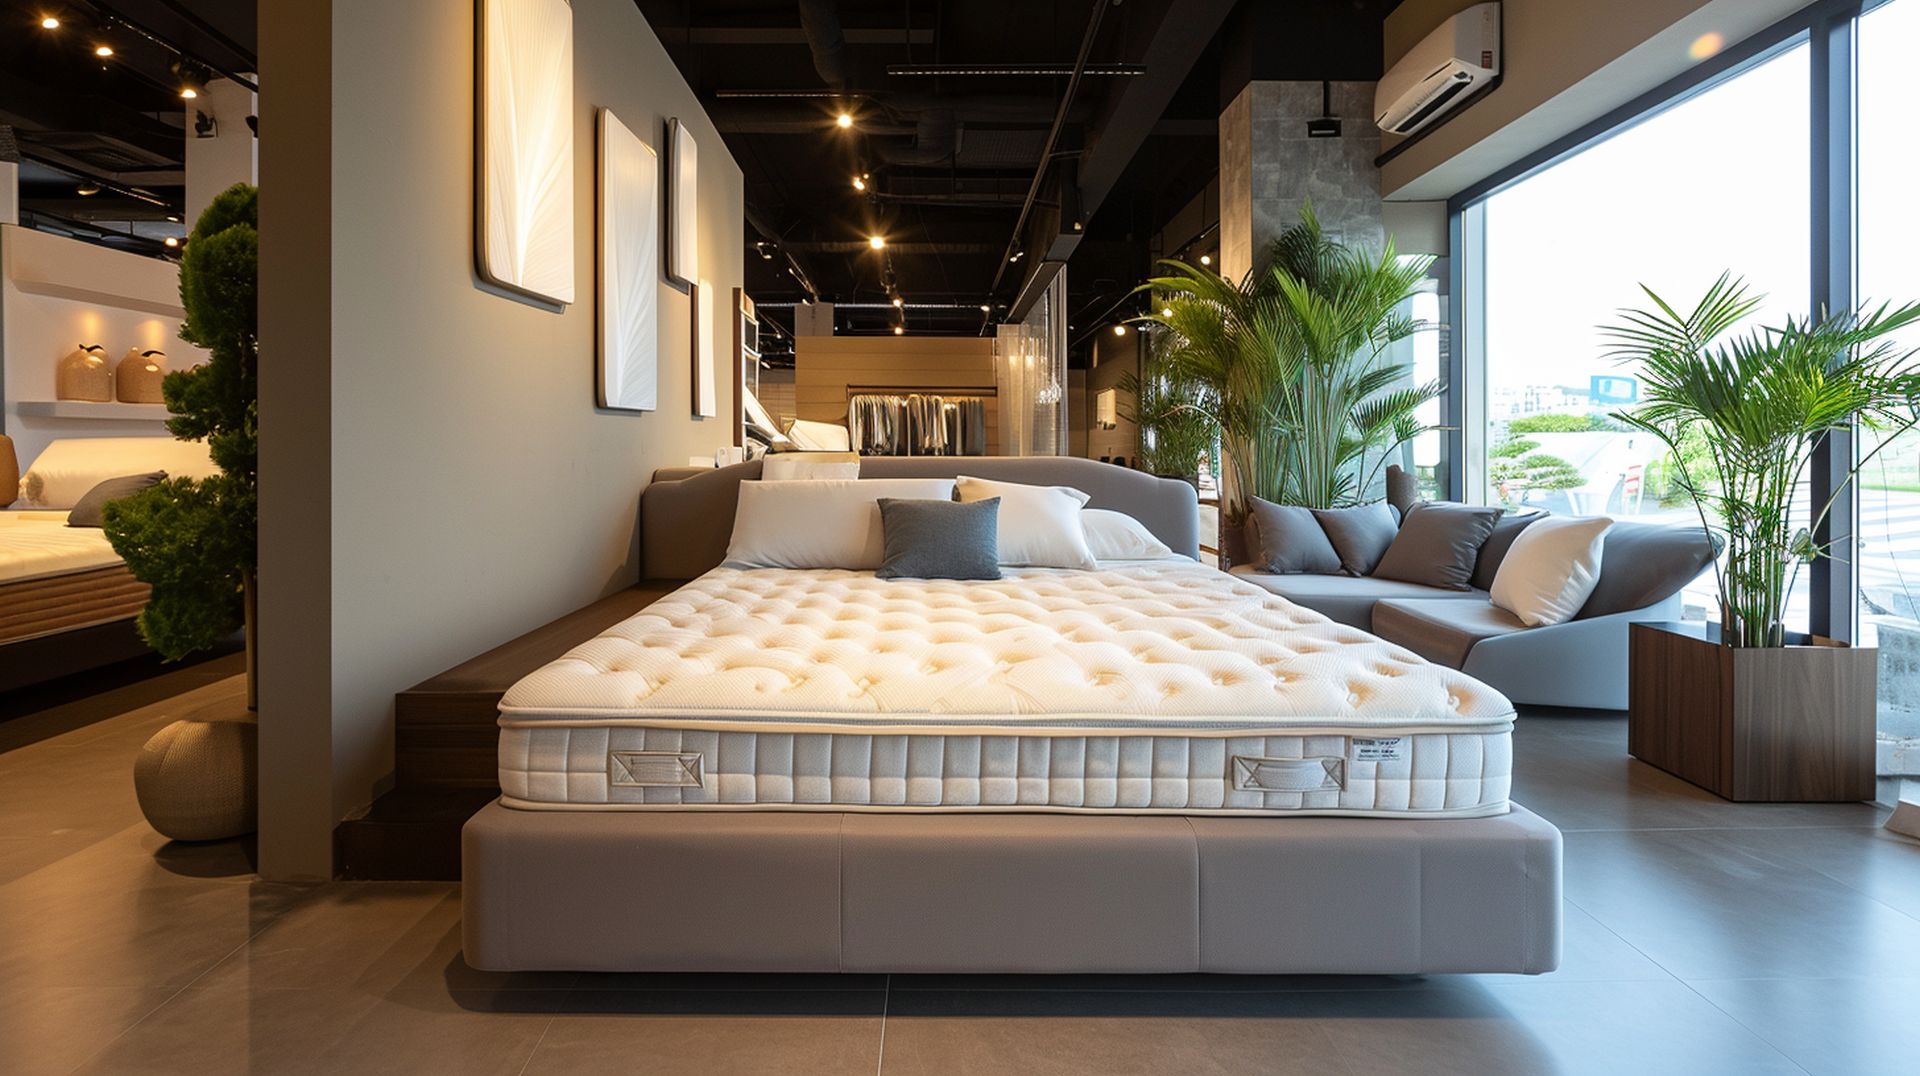 If you're looking for a new bed, mattress stores in Eugene offer the best customer and delivery service, financing, and warranties in Oregon